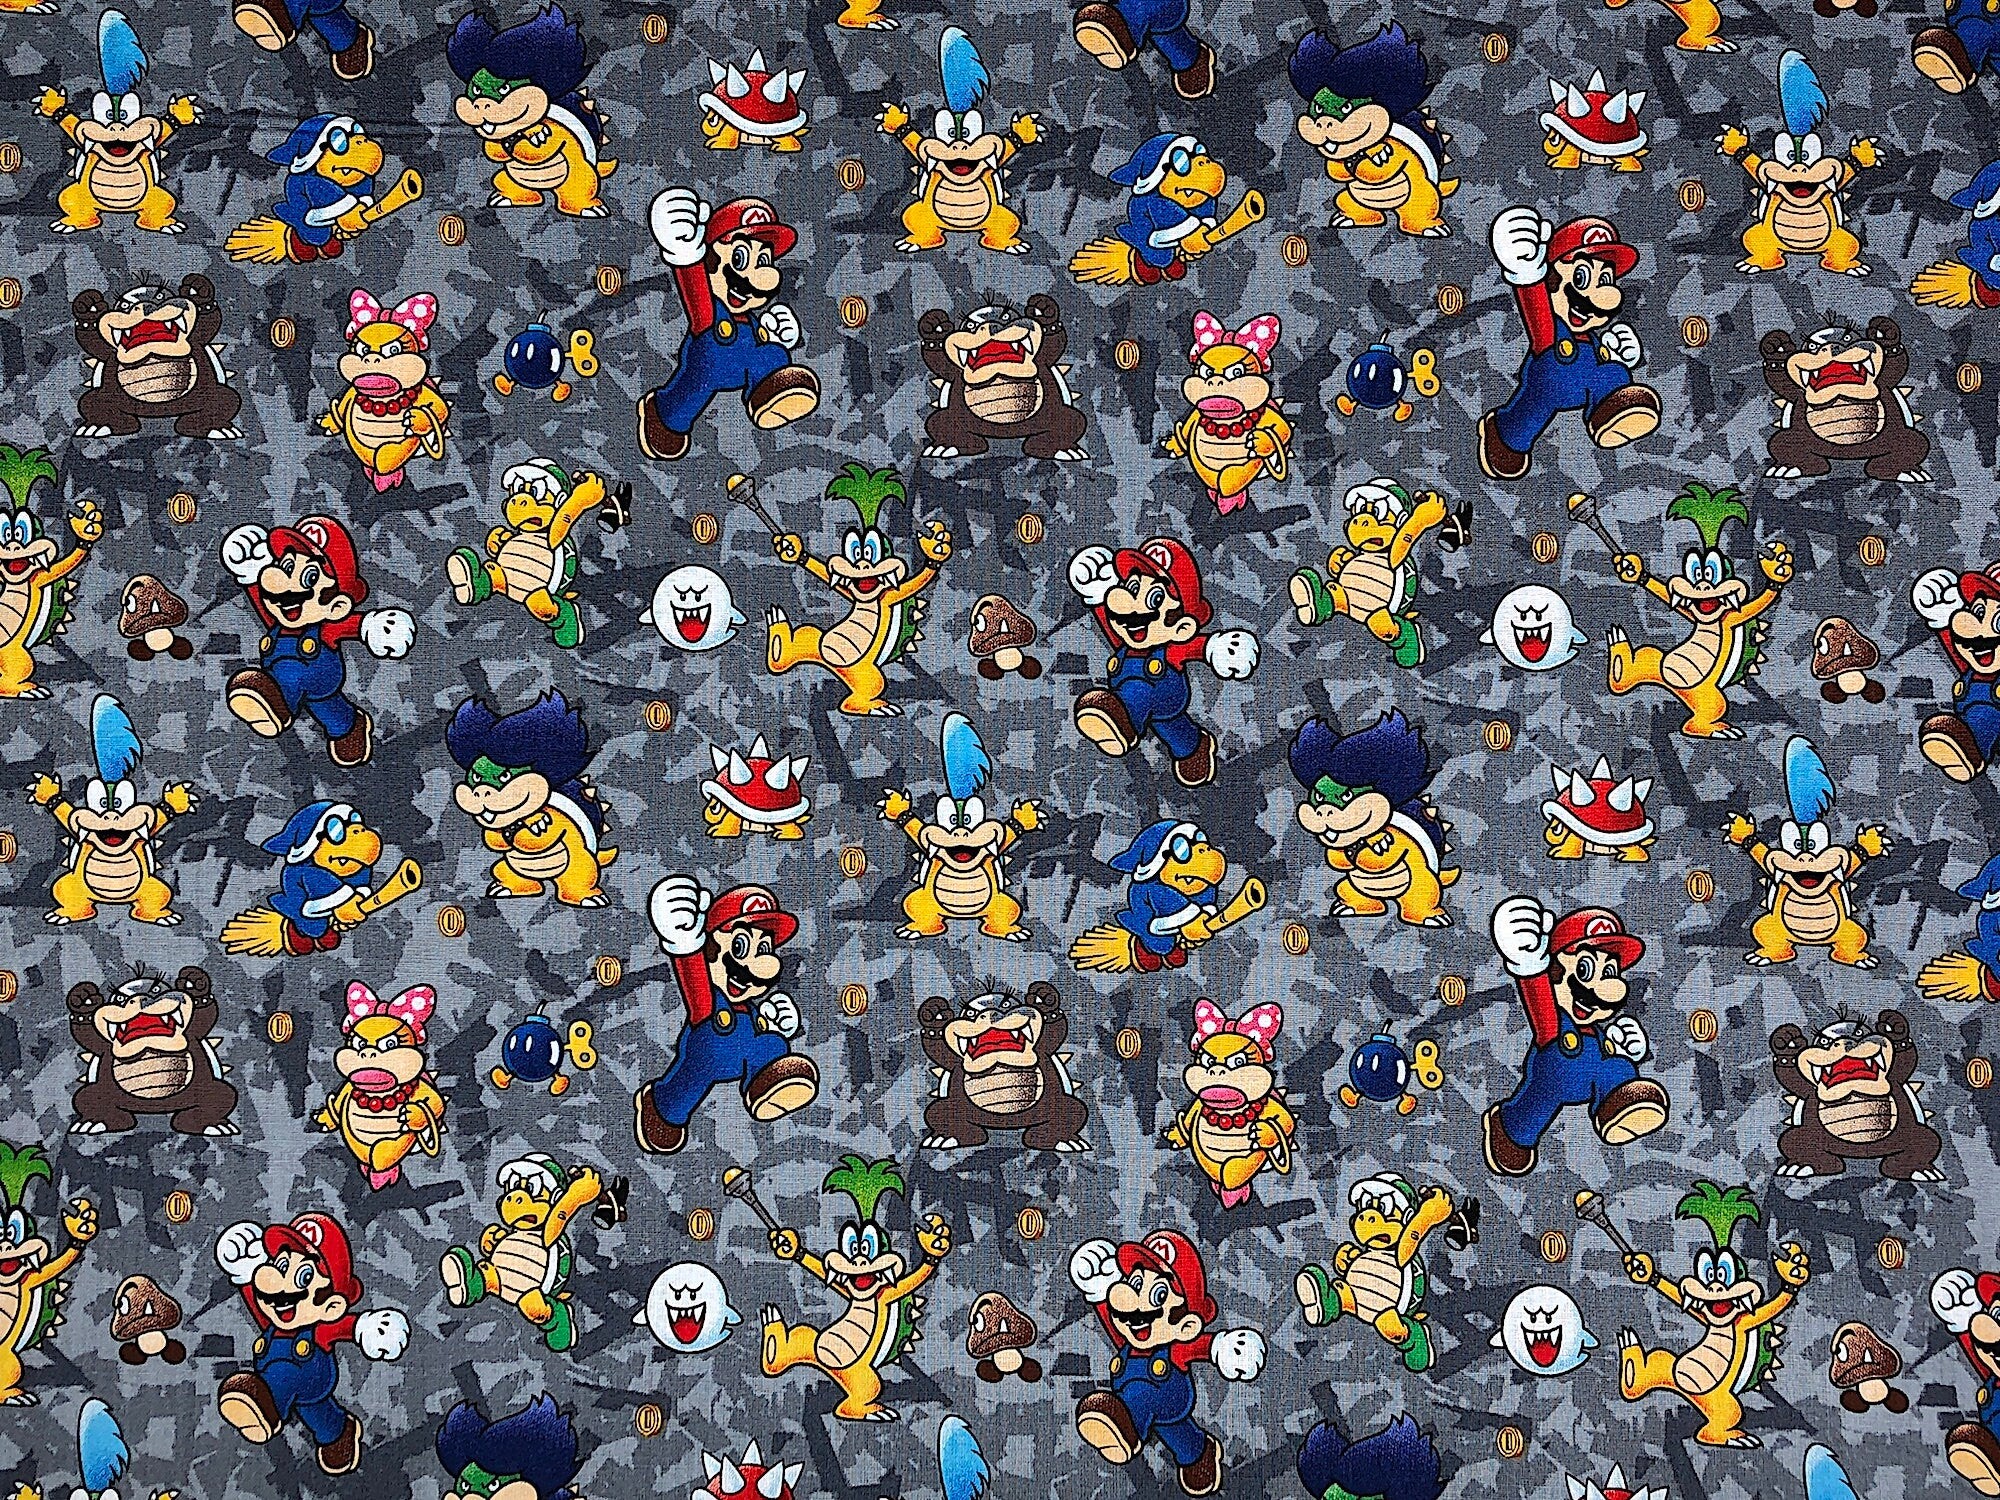 This gray fabric is covered with Super Mario characters such as Mario and Bowser.